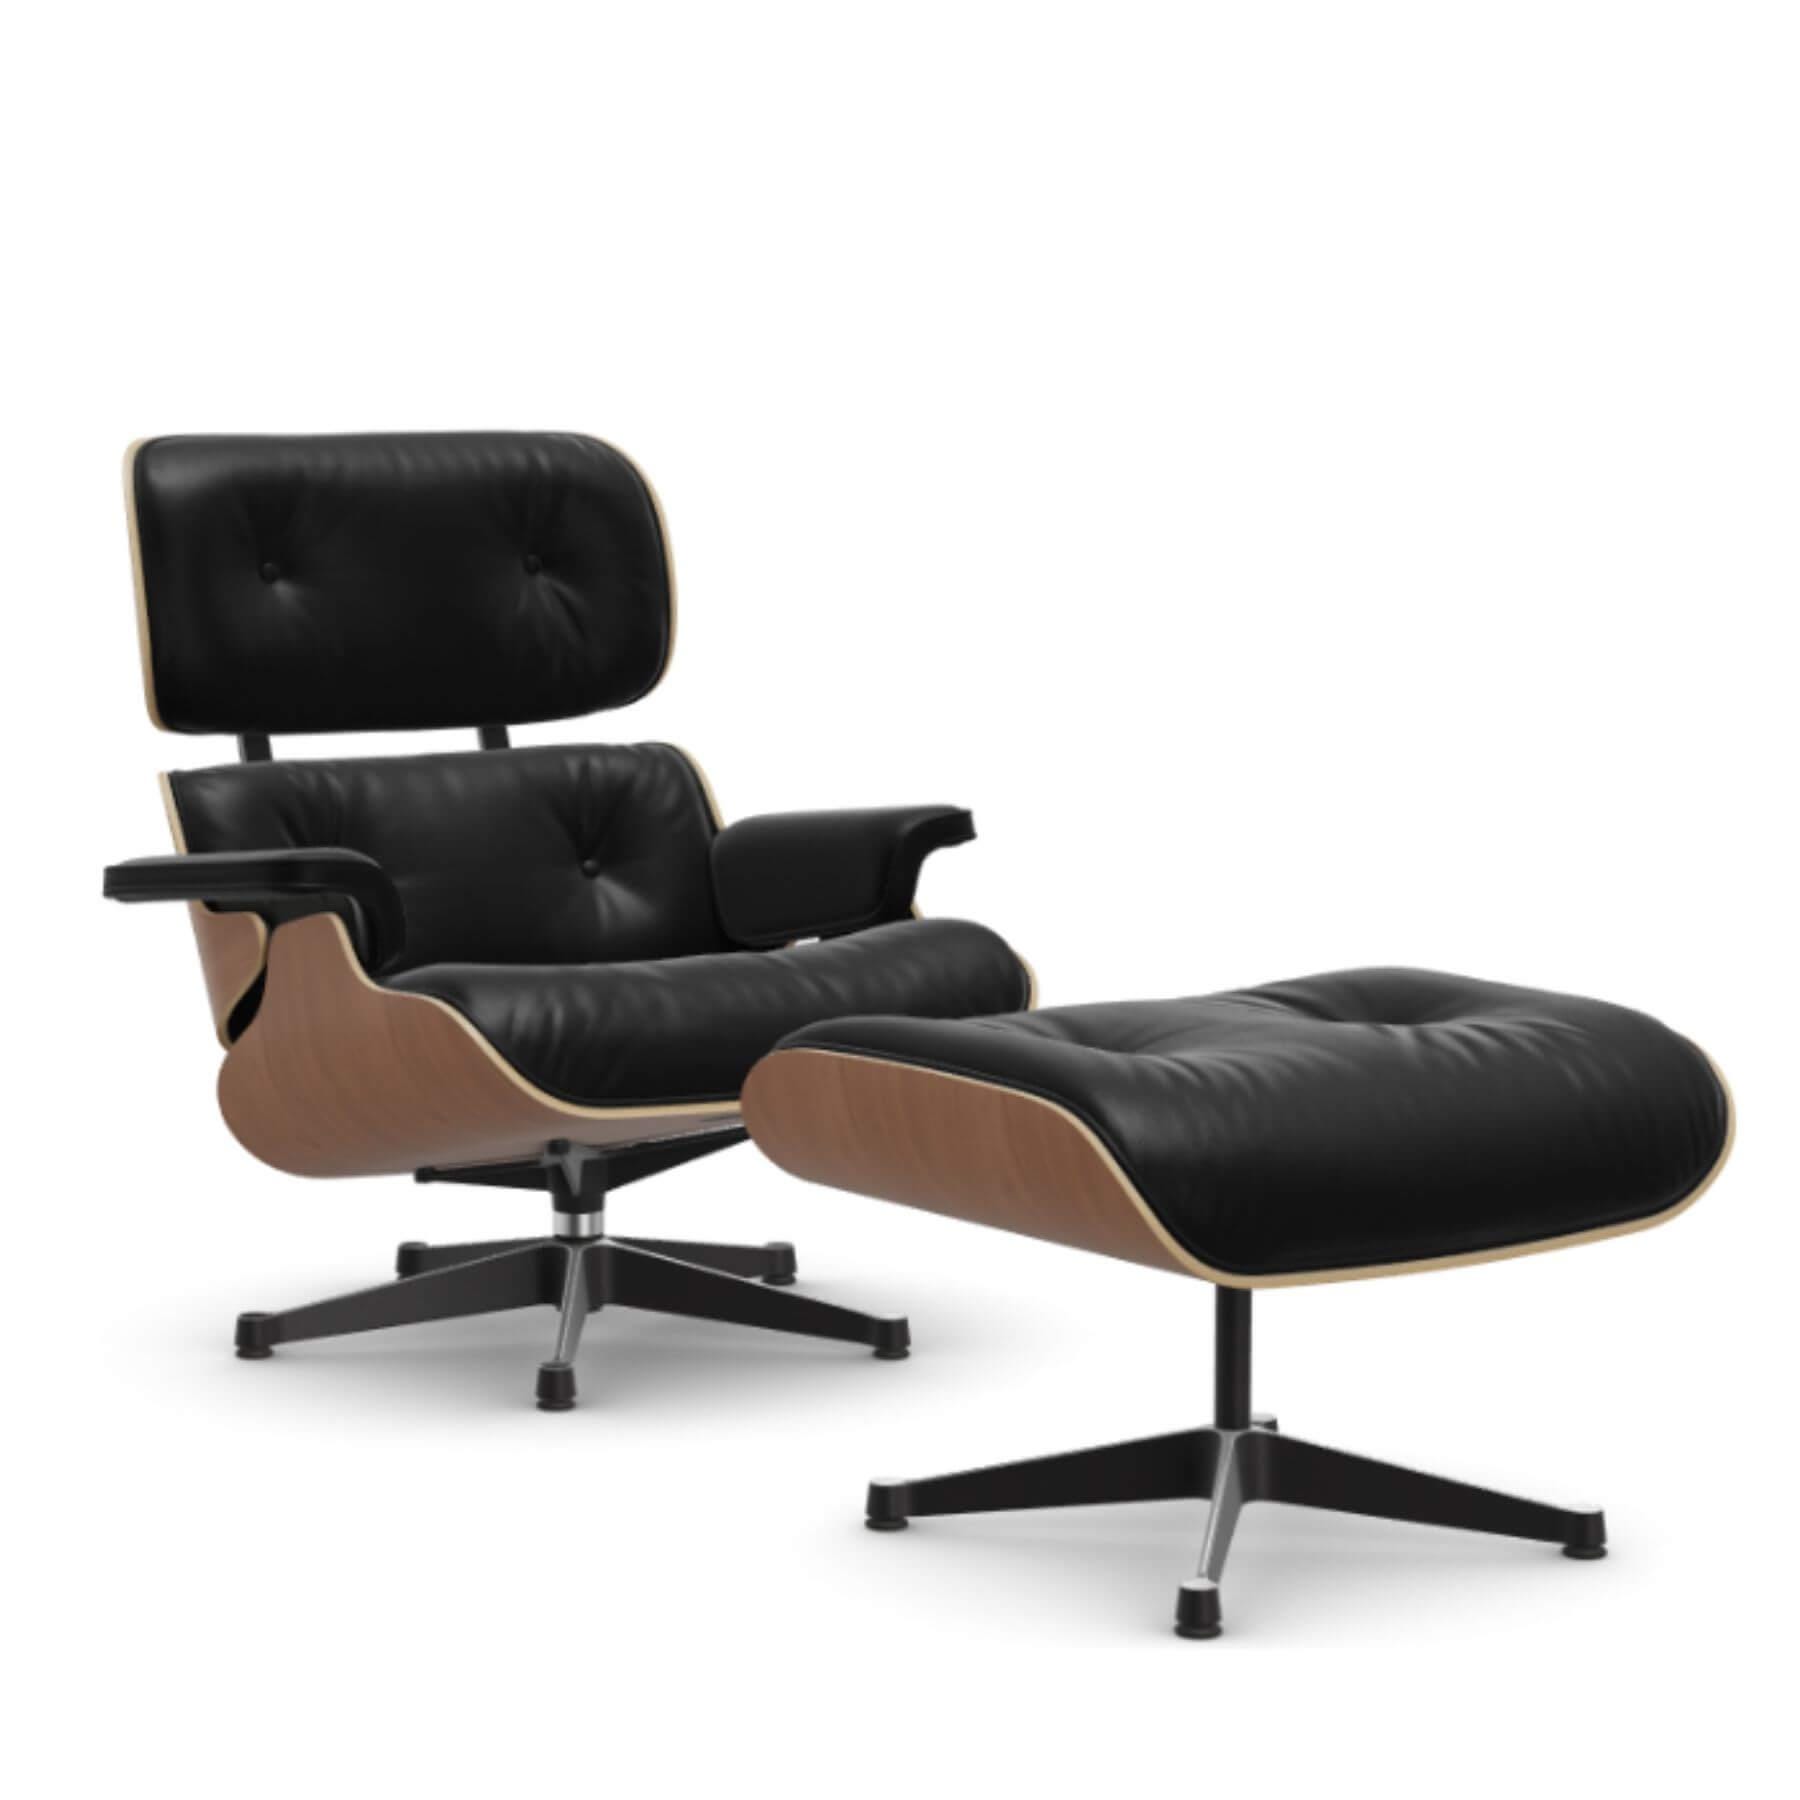 Vitra Eames Classic Lounge Chair American Cherry Leather Natural F Nero Polished Black With Ottoman Light Wood Designer Furniture From Holloways O